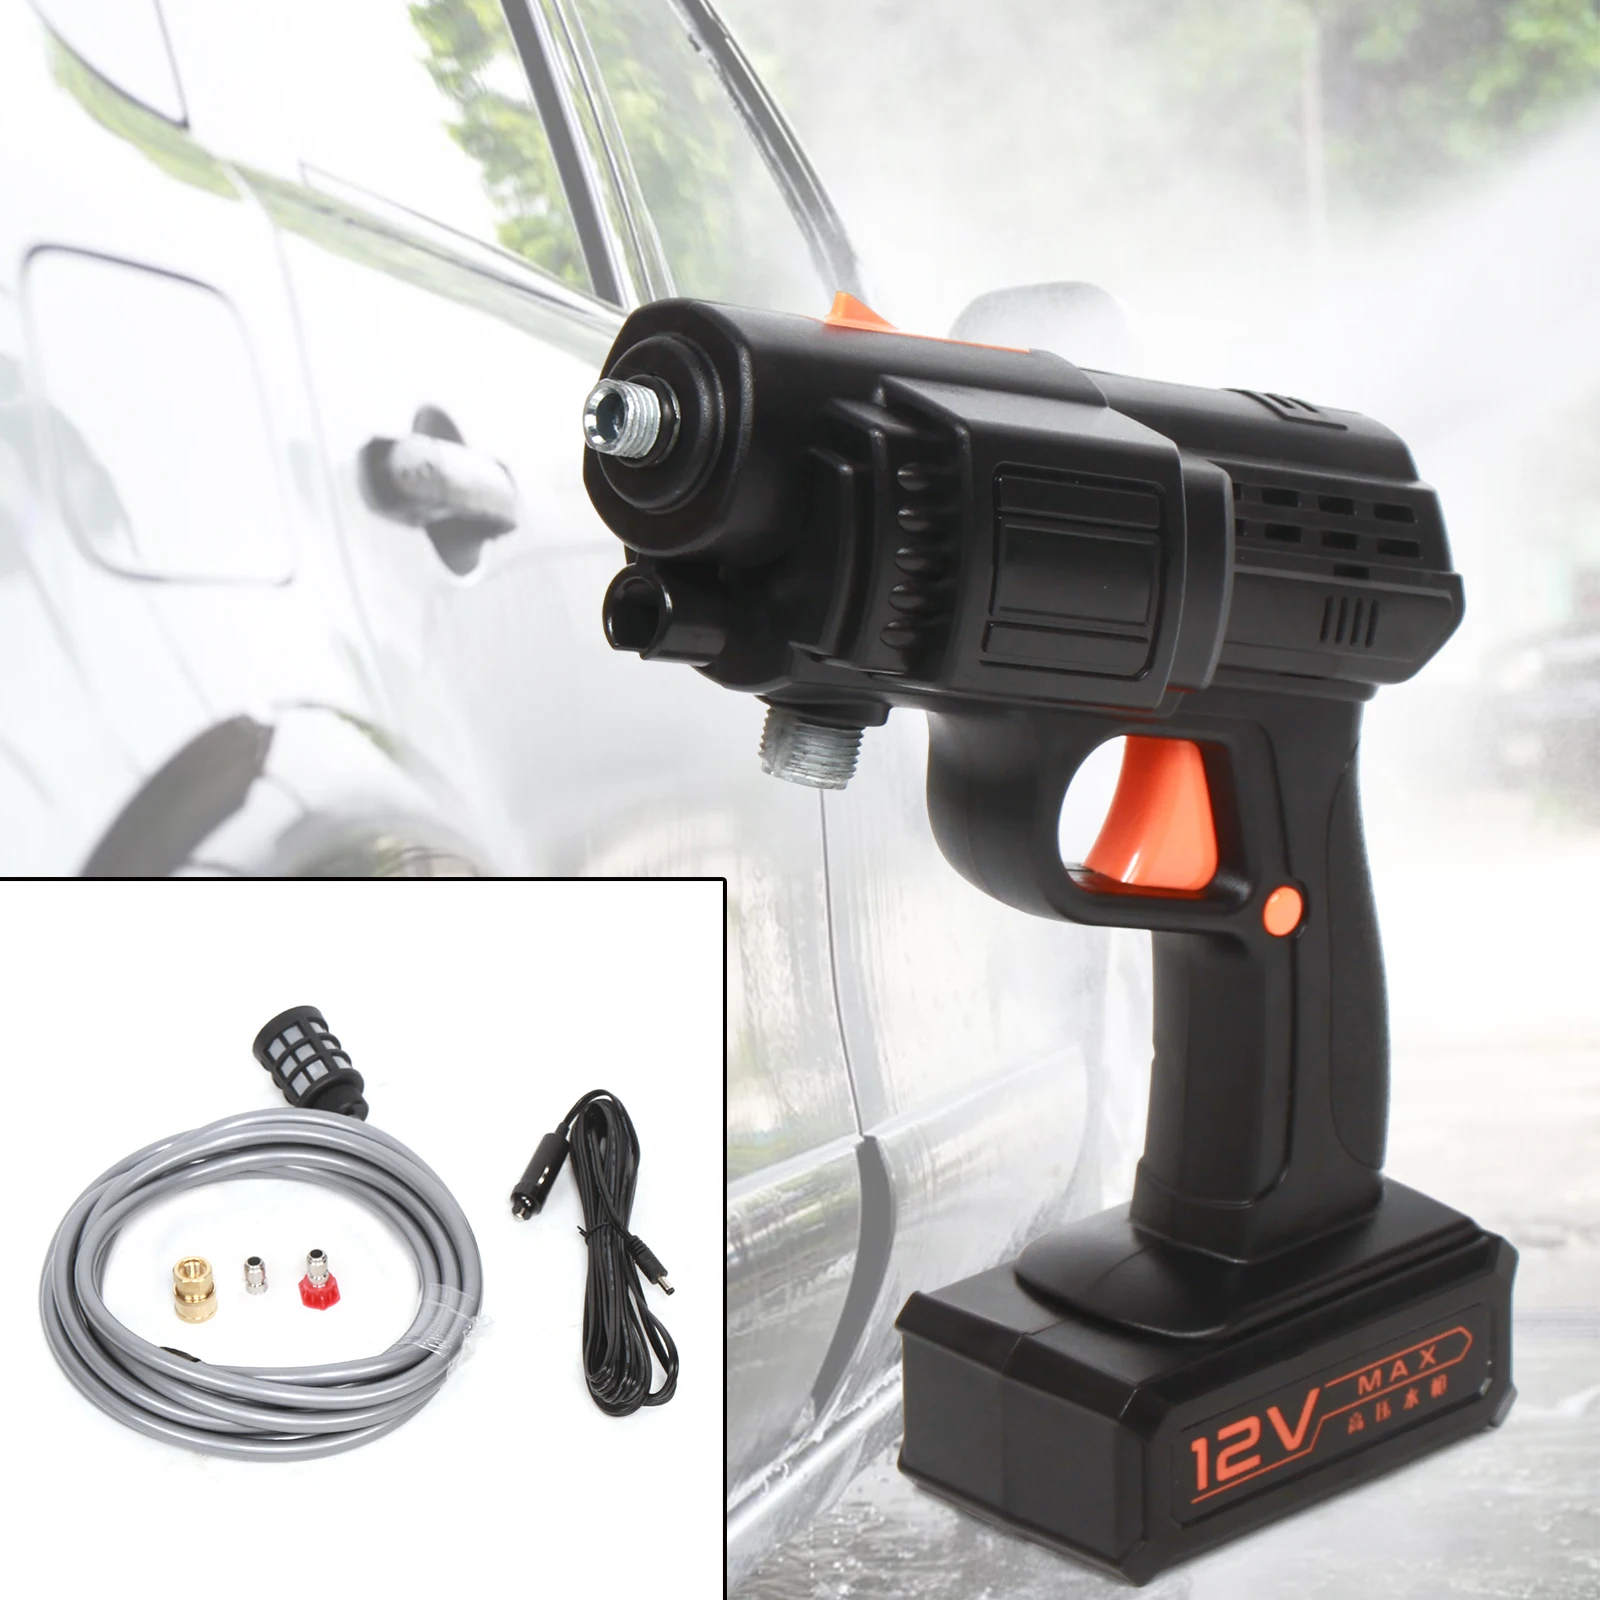 12v-electric-pressure-washer-power-washer-portable-handheld-car-cleaning-machine-kit-with-power-cord-pipe